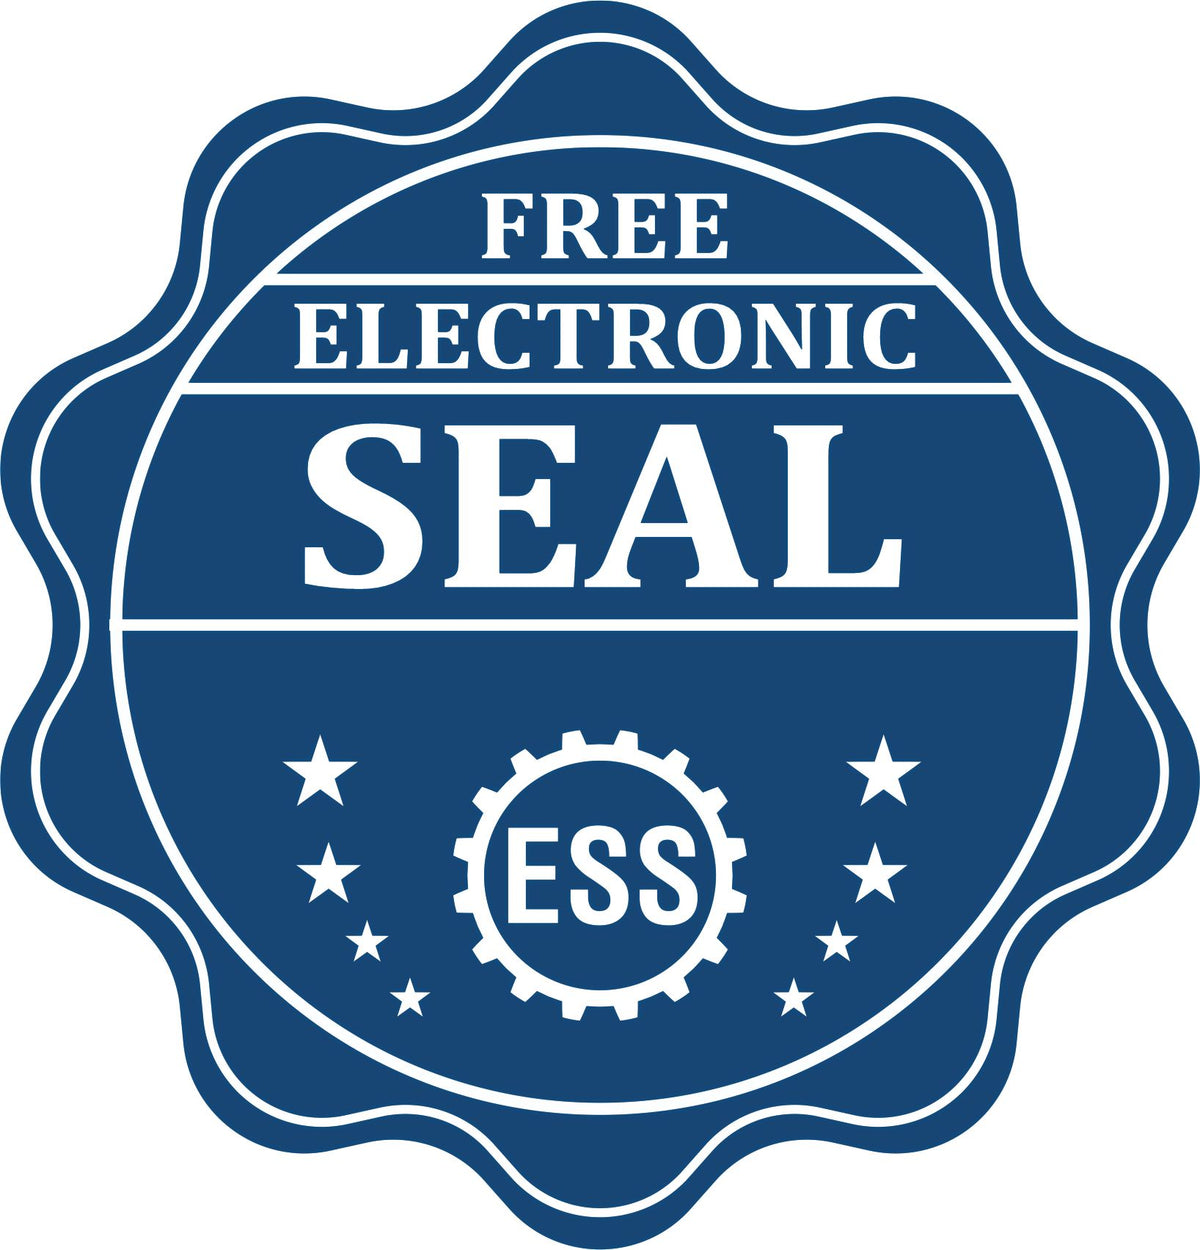 A badge showing a free electronic seal for the Super Slim New Mexico Notary Public Stamp with stars and the ESS gear on the emblem.